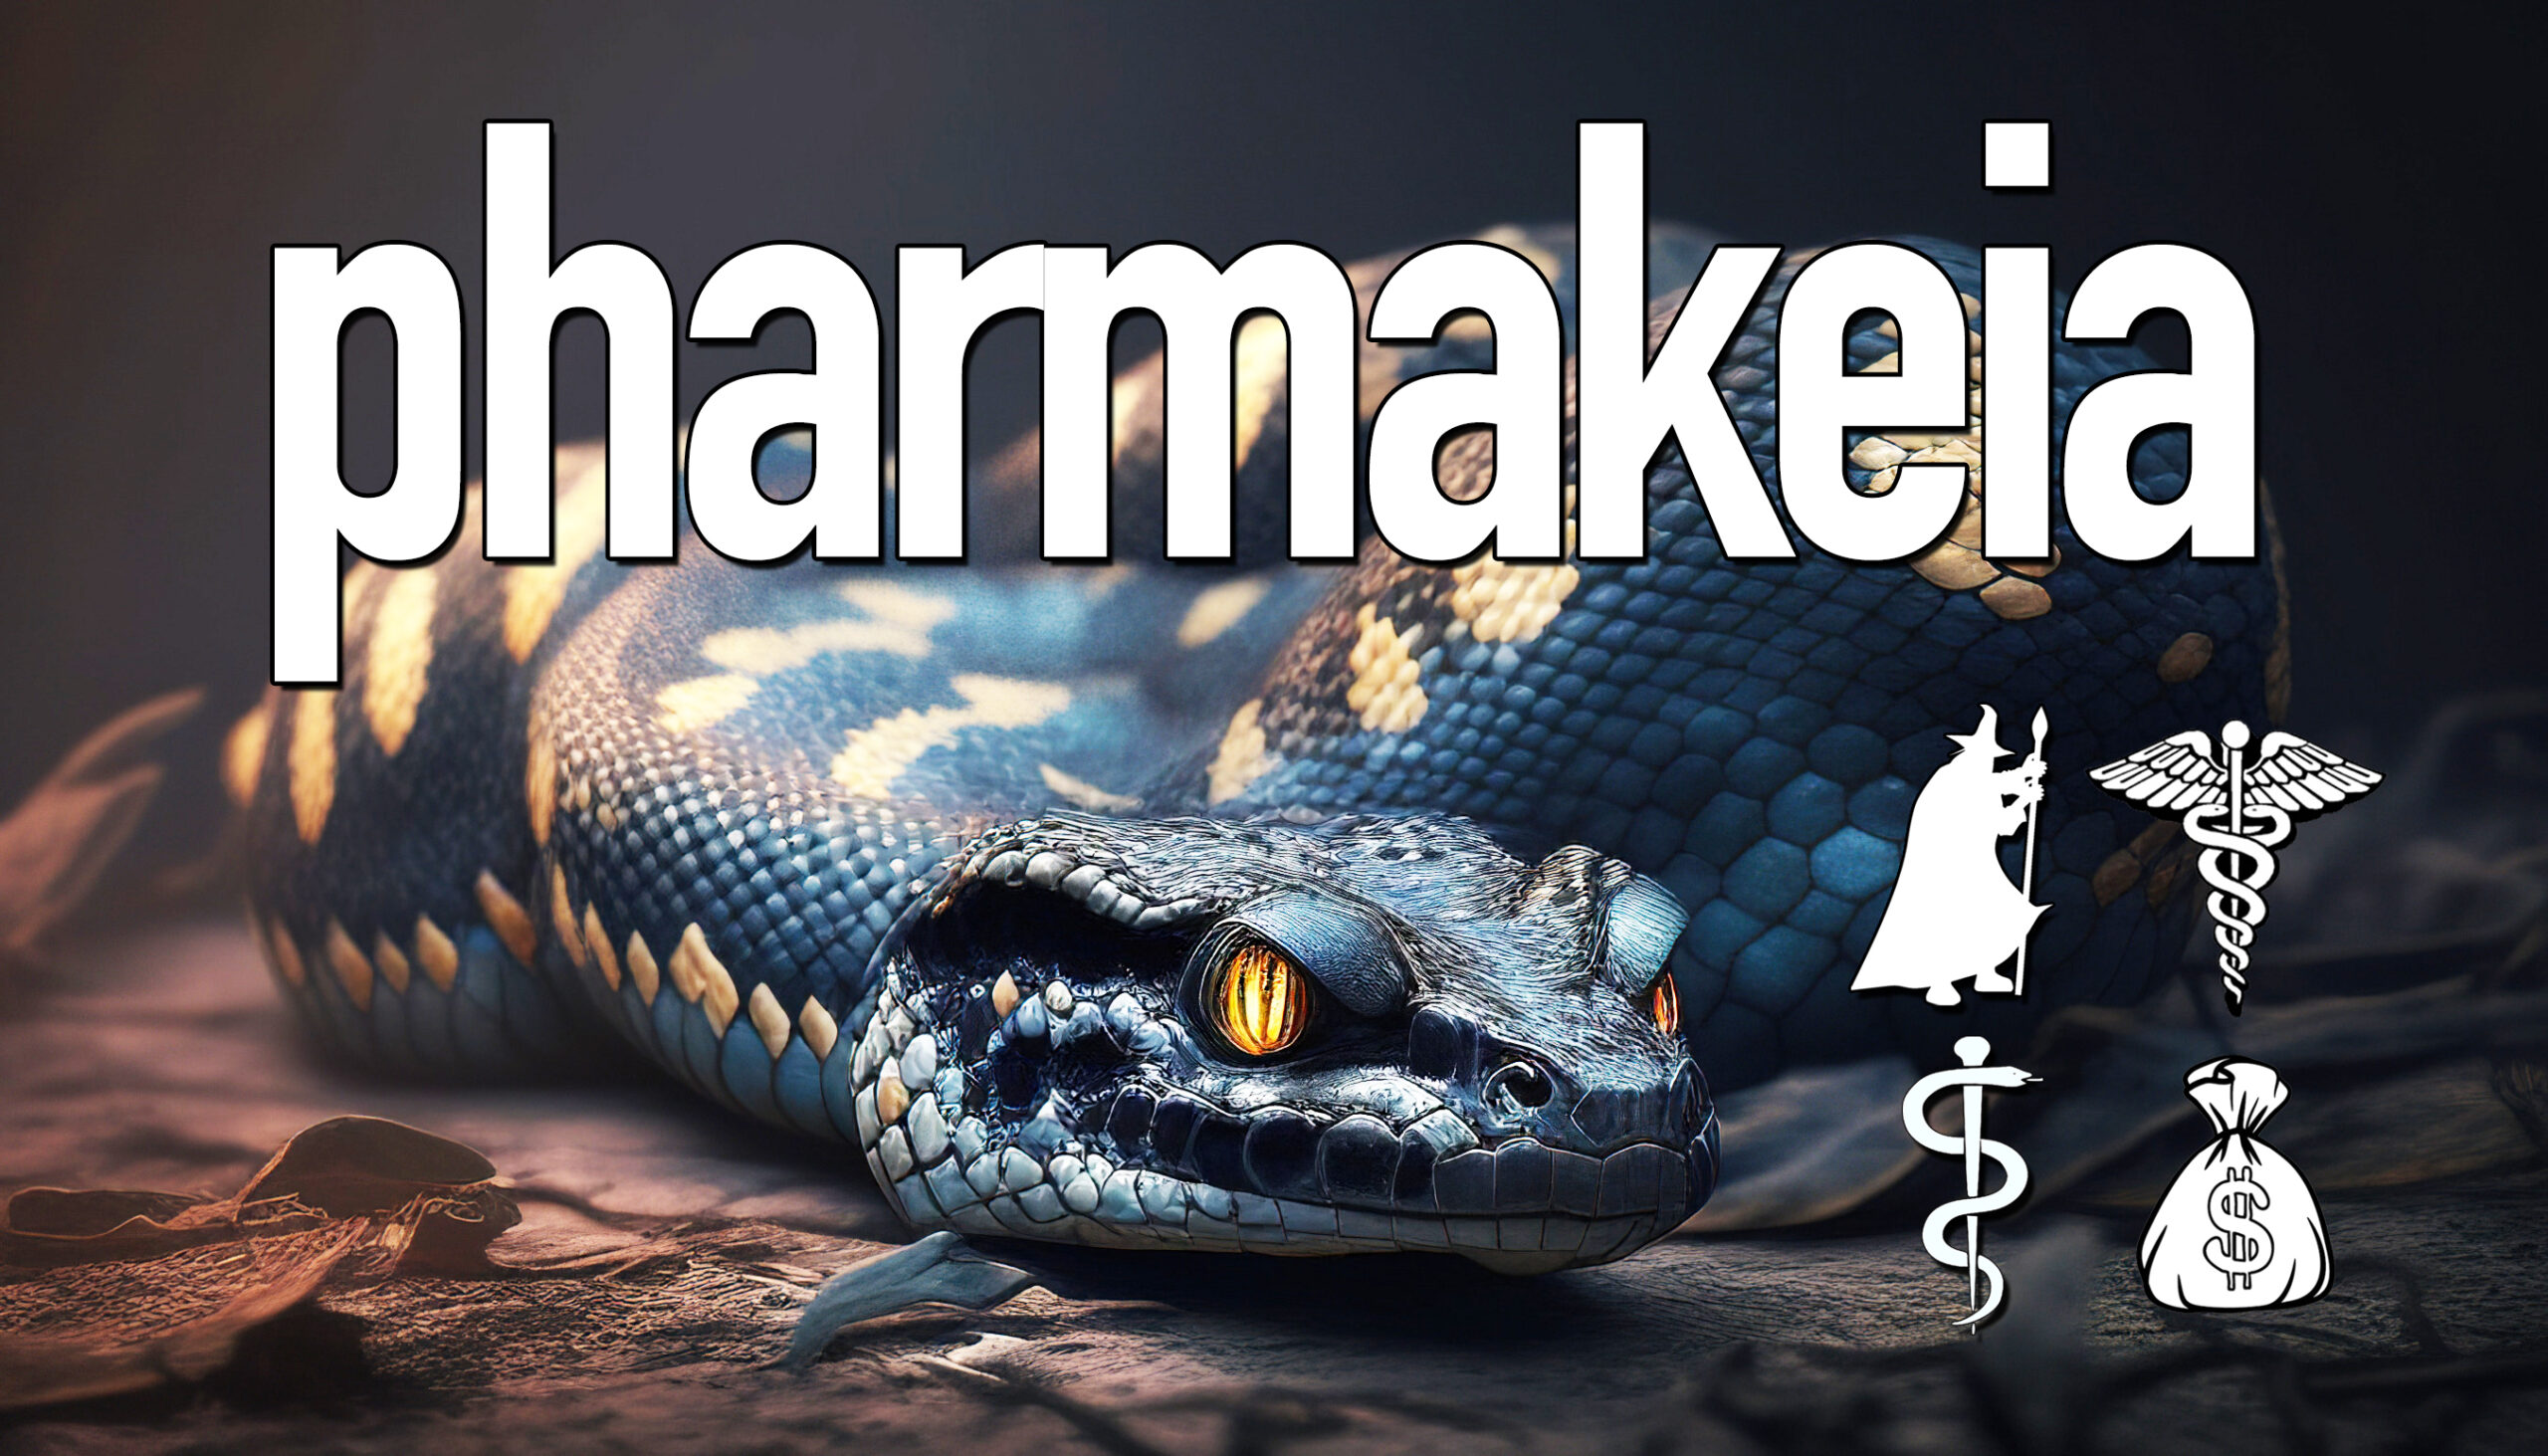 Serpents, Staffs, Sorcery & Poison: A History Of The Word “Pharmacy”